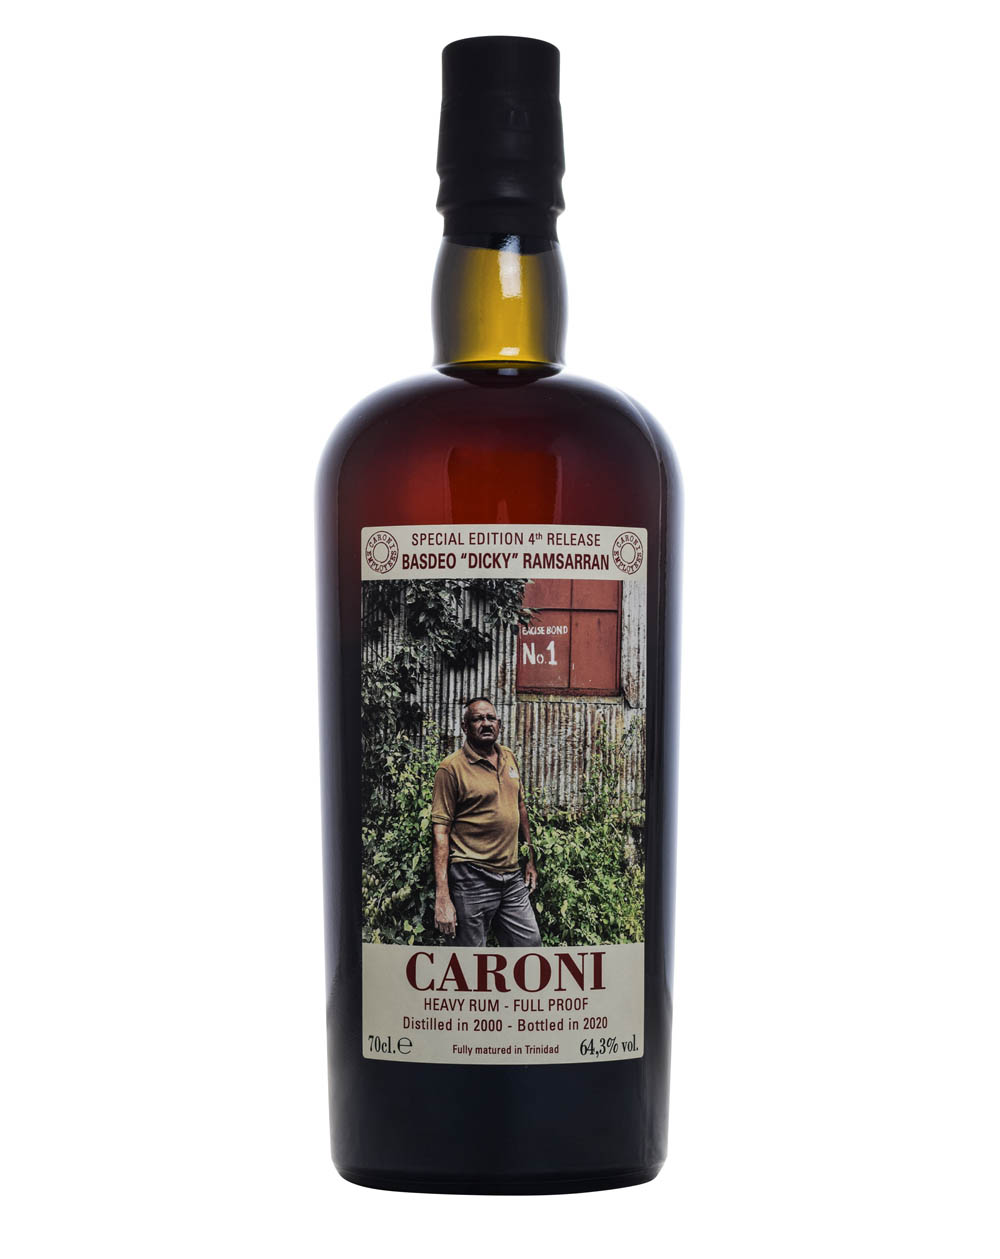 Caroni 2000 Special Edition 4th Release Basdeo _Dicky_ Ramsarran Musthave Malts MHM